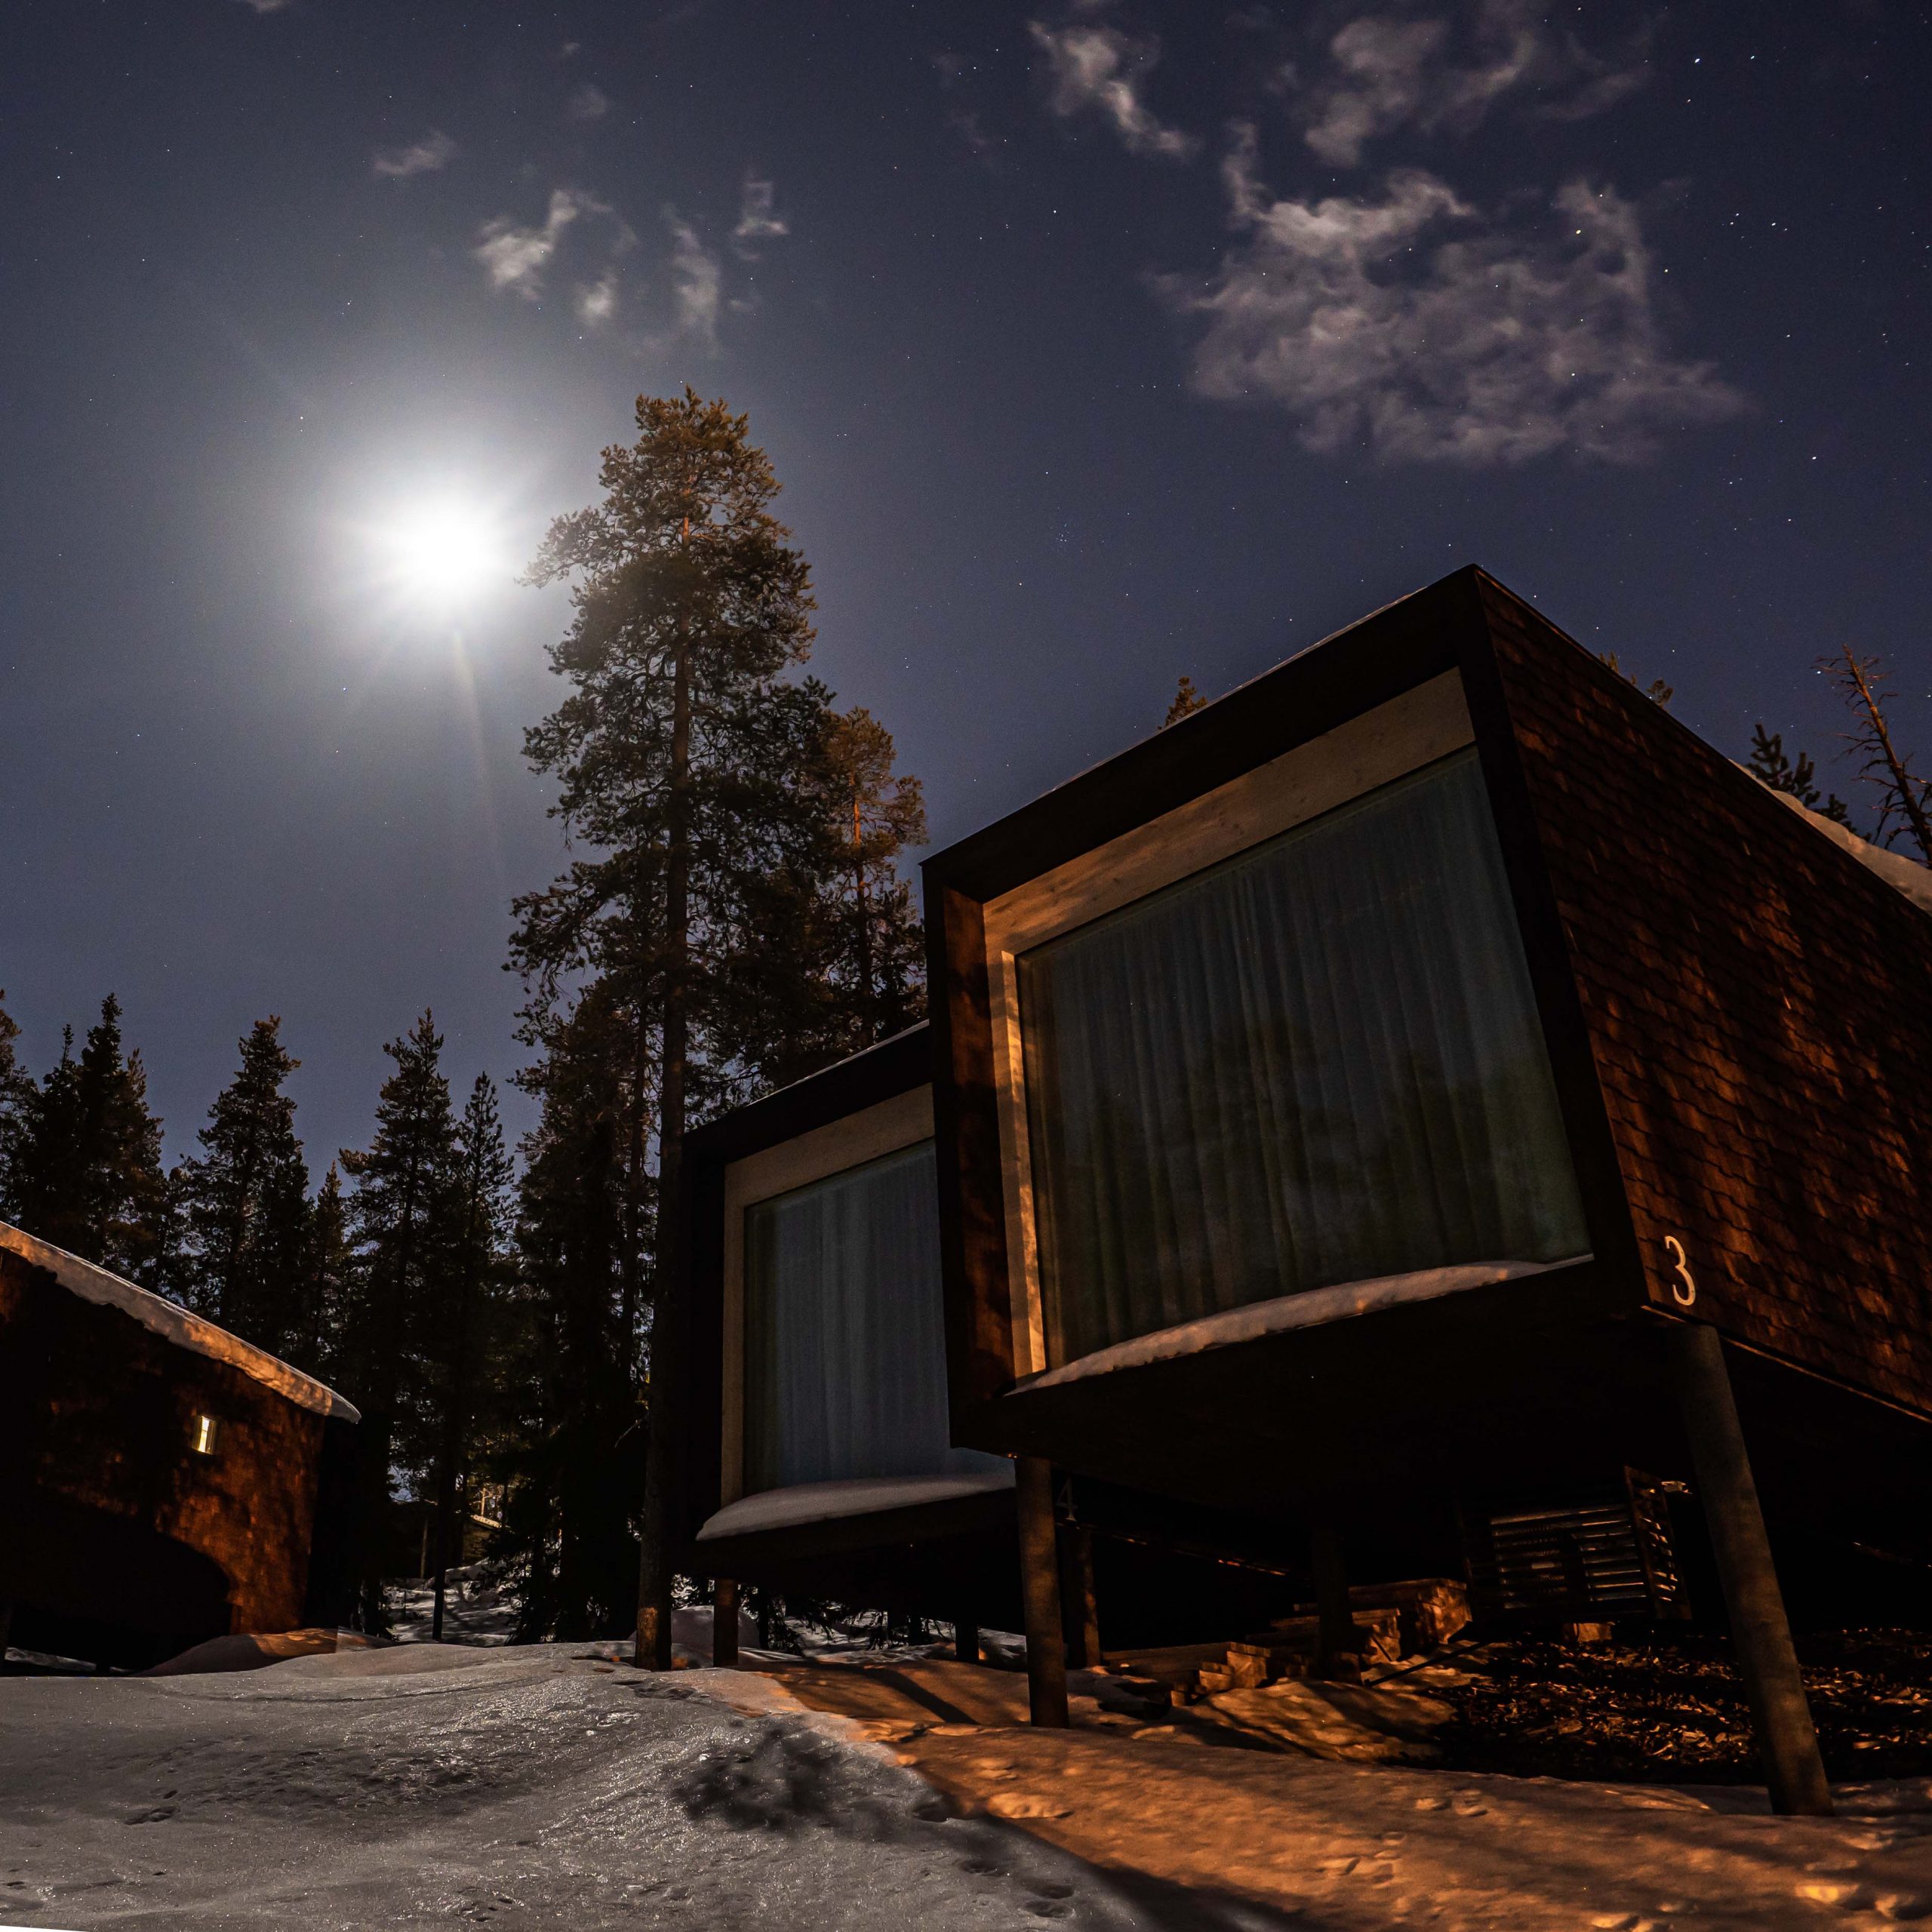 Moon at the night sky at Arctic TreeHouse Hotel